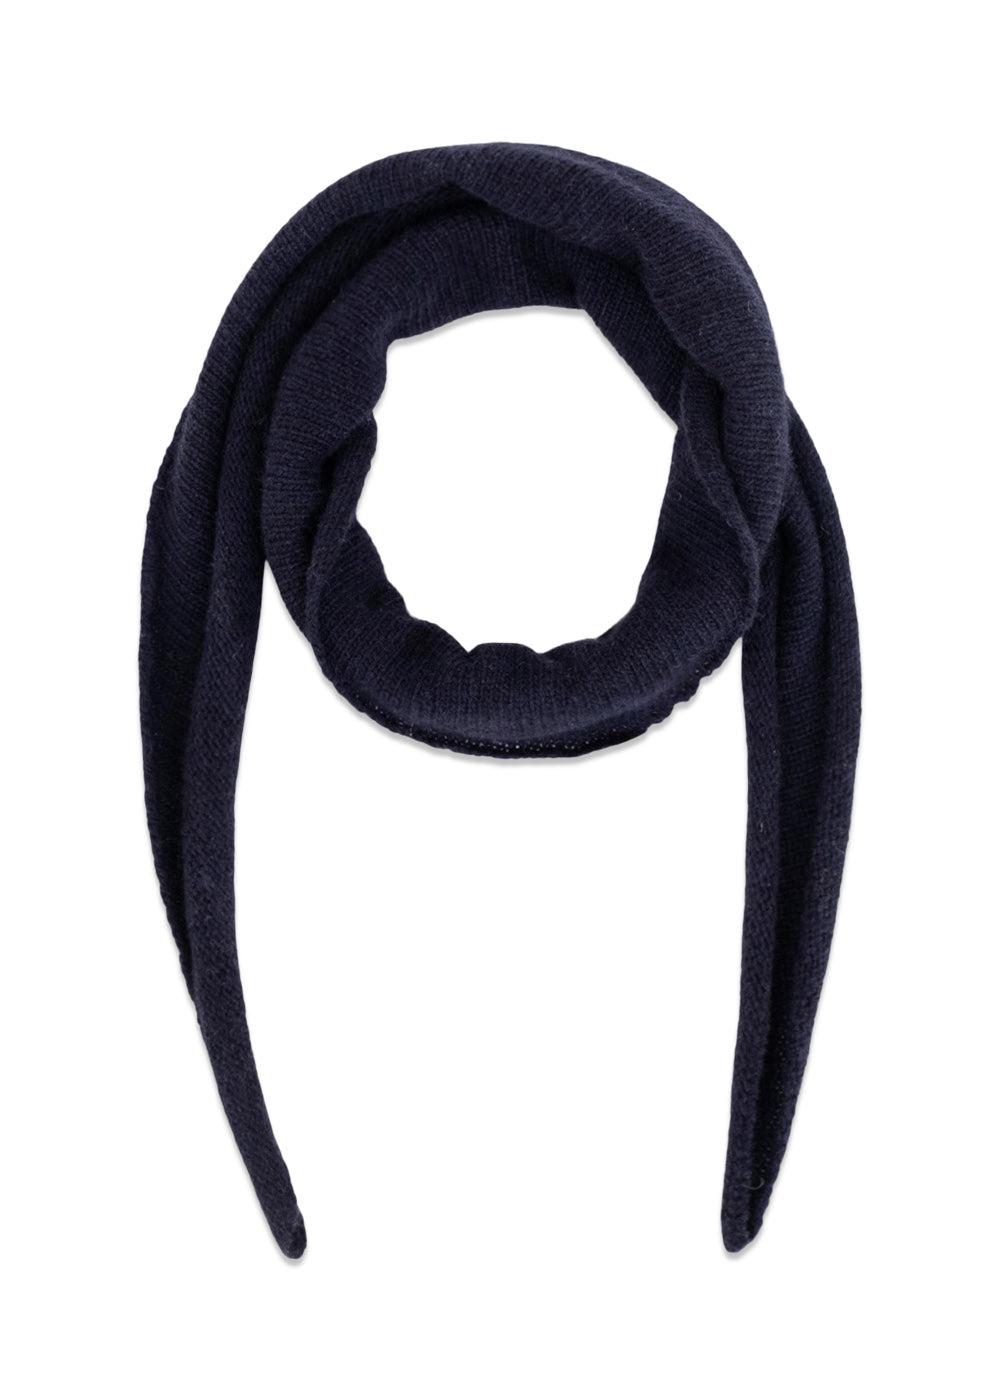 Neo Noirs Misty Knit Scarf - Navy. Køb accessories her.